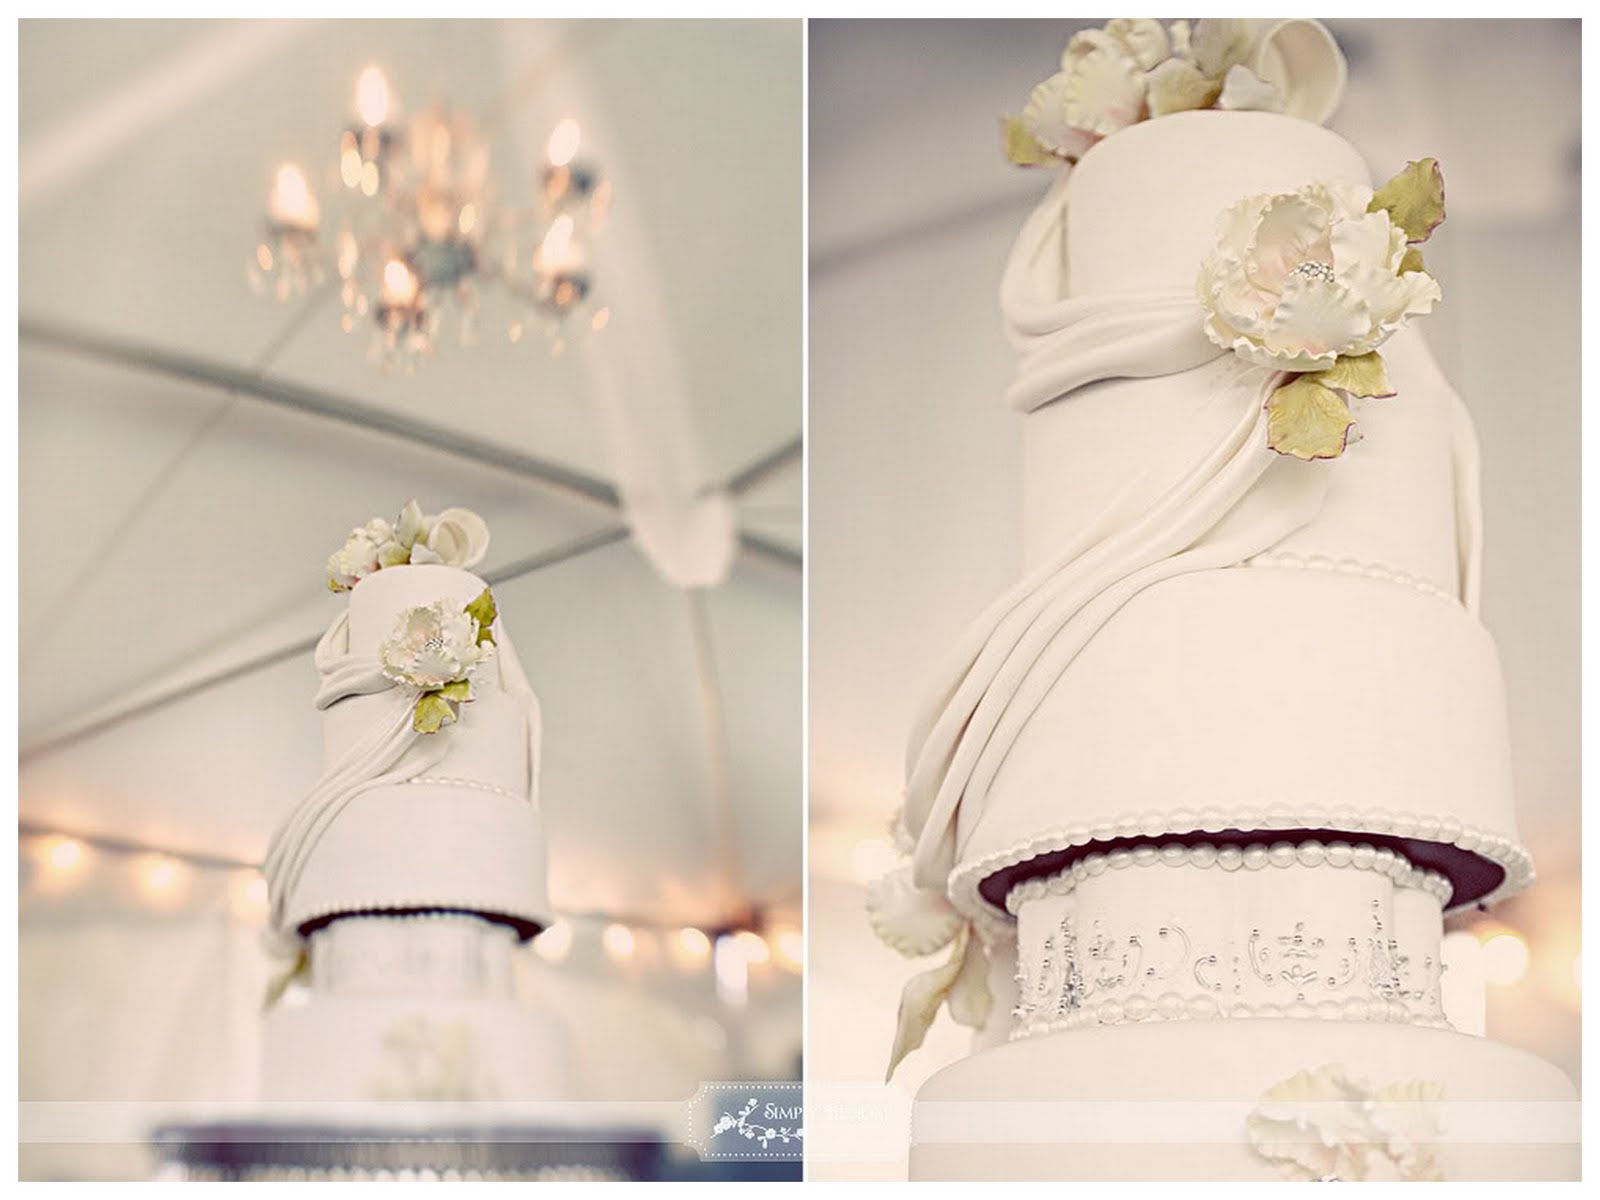 sparkle wedding cake stands  pretty wedding ideas ? ♥ Or how about marquee wedding ideas